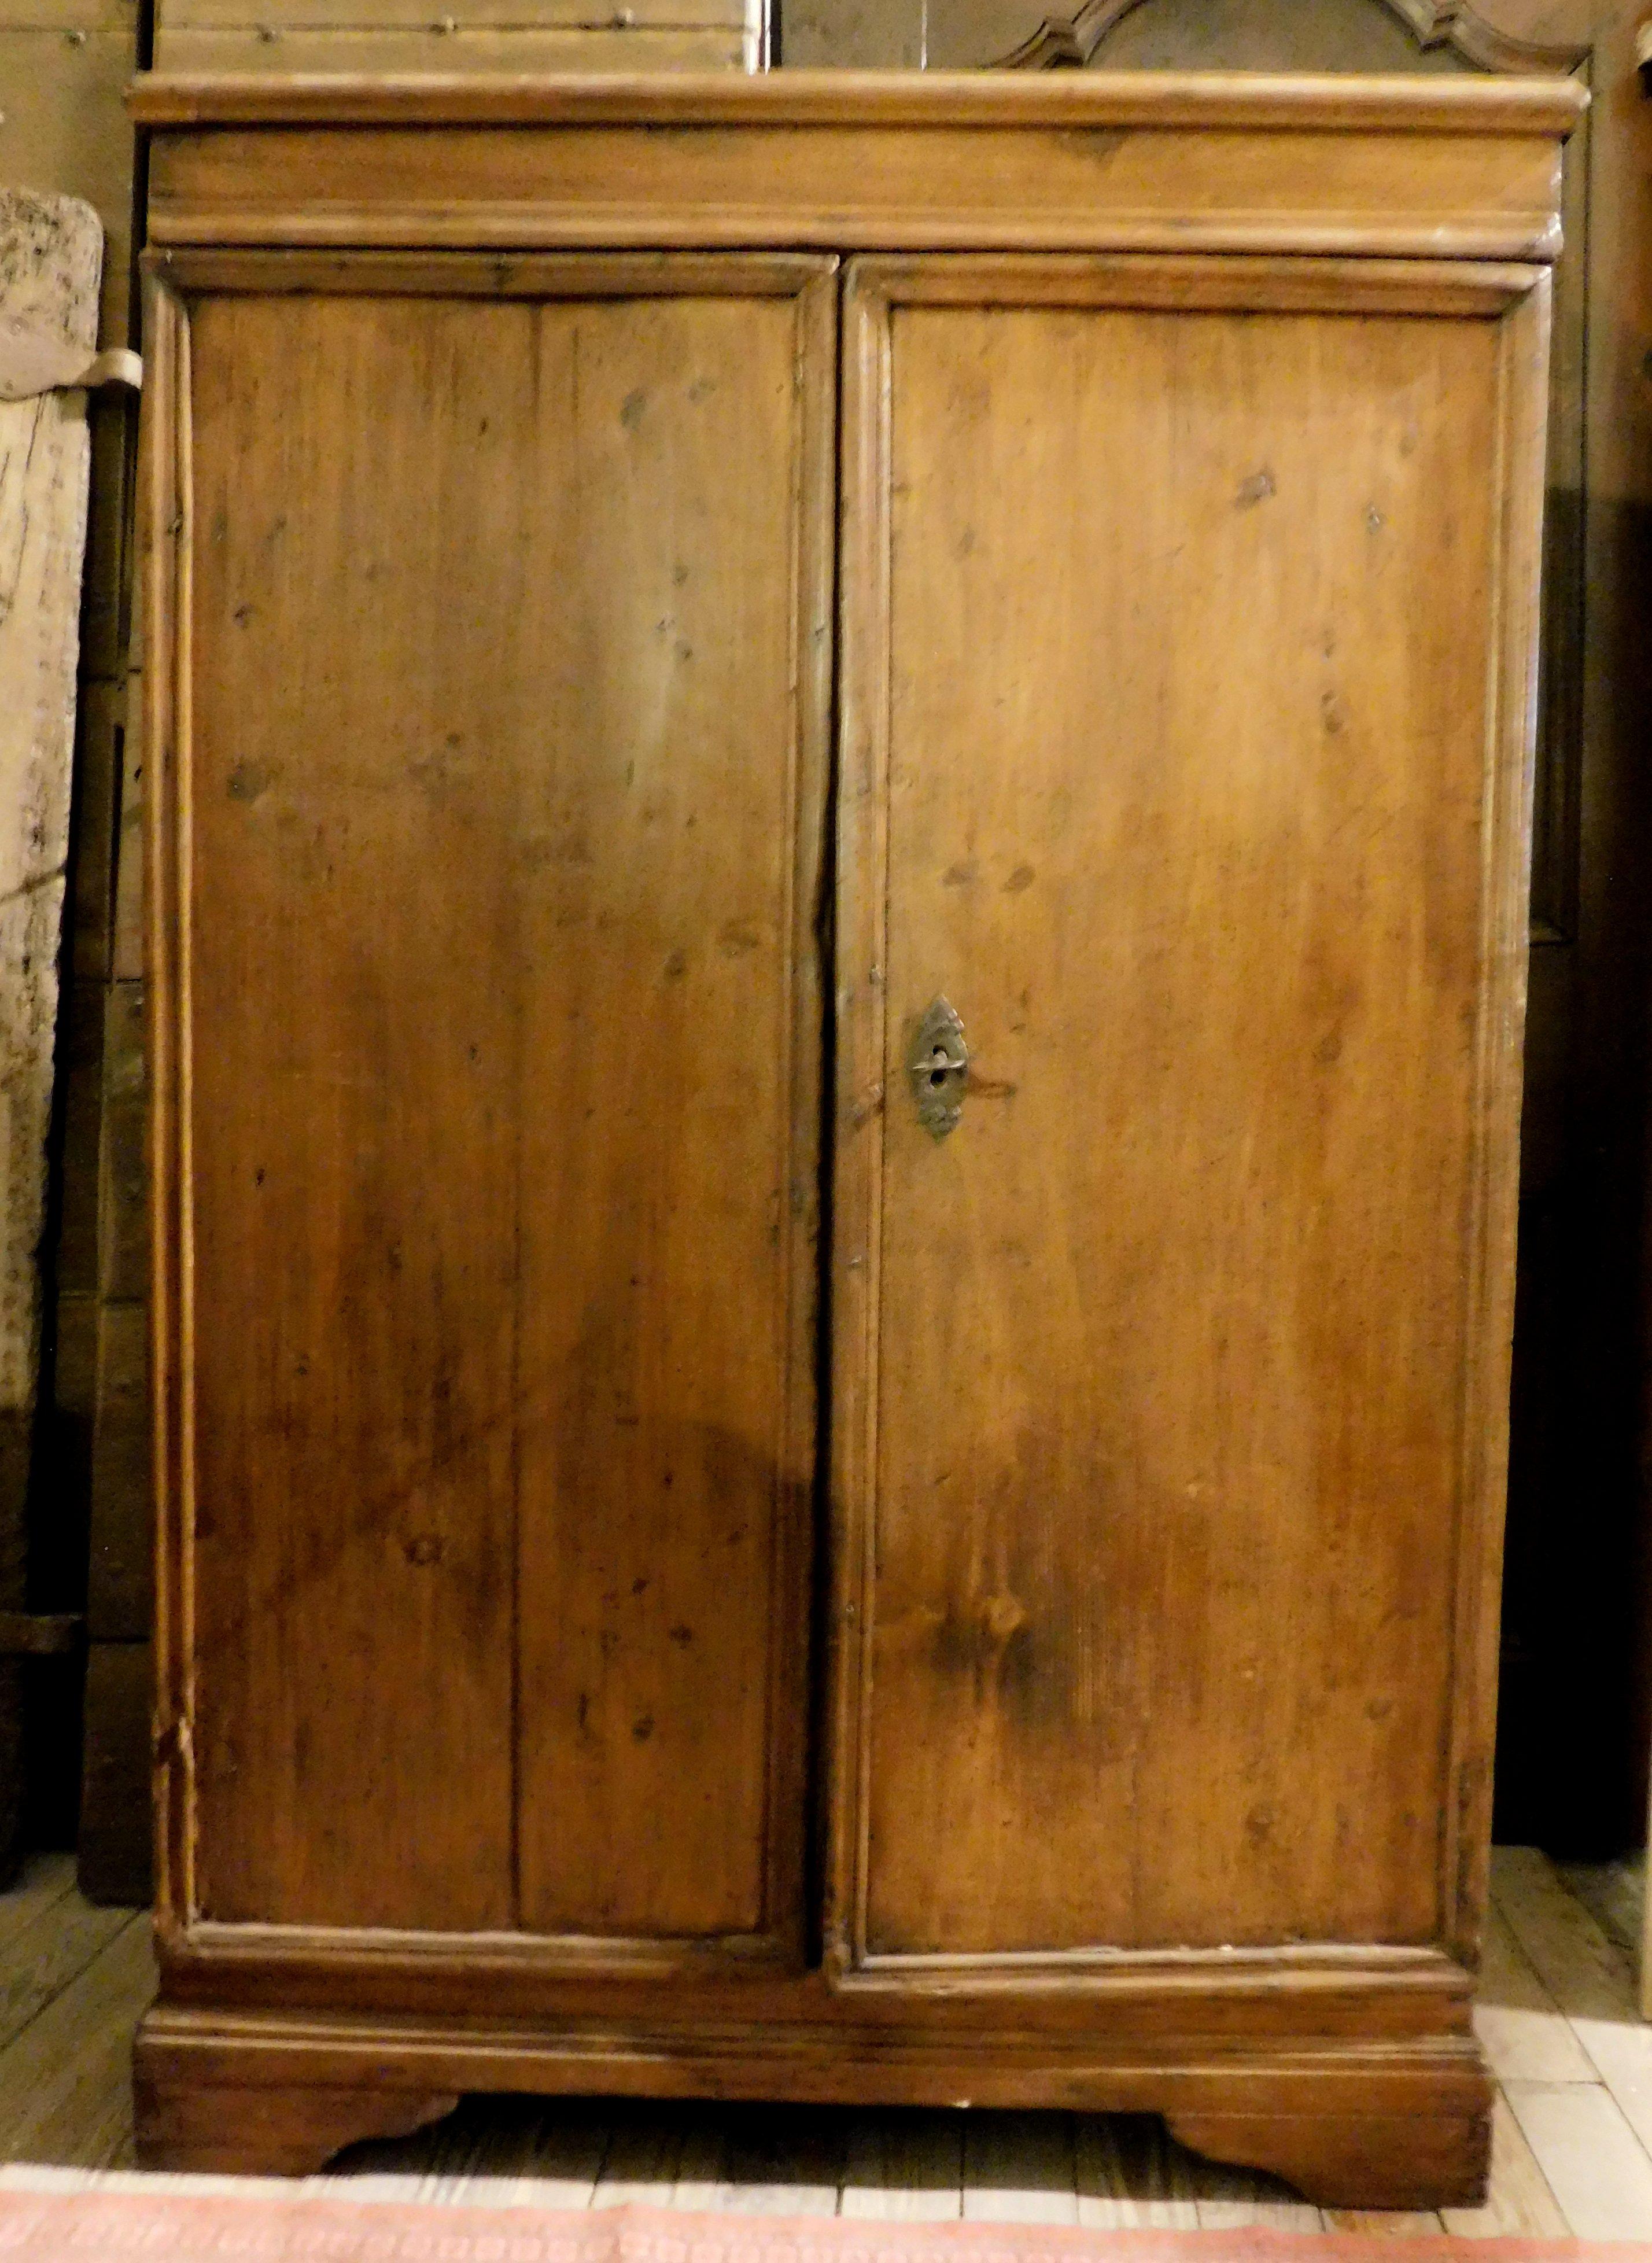 Antique cabinet in poplar, hand-carved in an elegantly simple style, has 2 large doors with internal shelves, built in the middle of the 18th century in Italy (from Piedmont). maximum size cm w 108 x H 163 x P. 40, ideal for storing clothes, in a